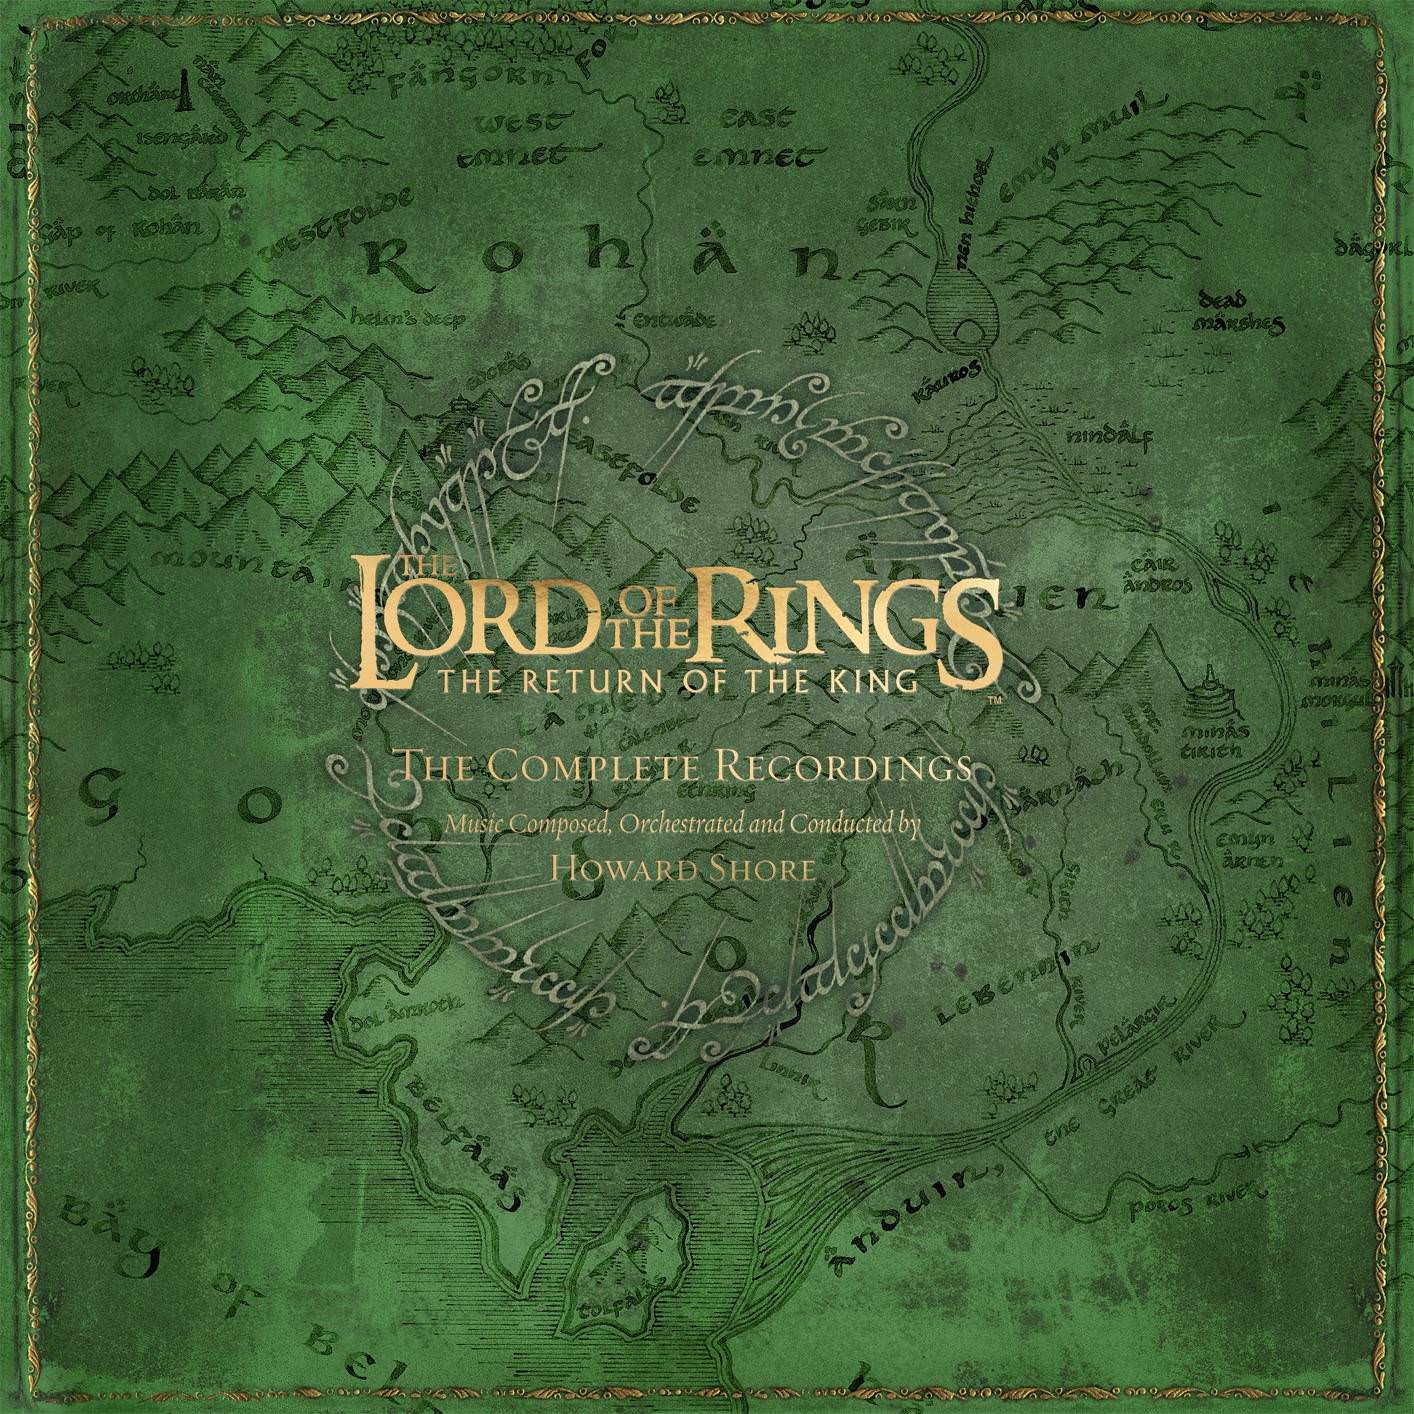 howardshore-the-lord-of-the-rings-the-return-of-the-king-the-complete-recordings